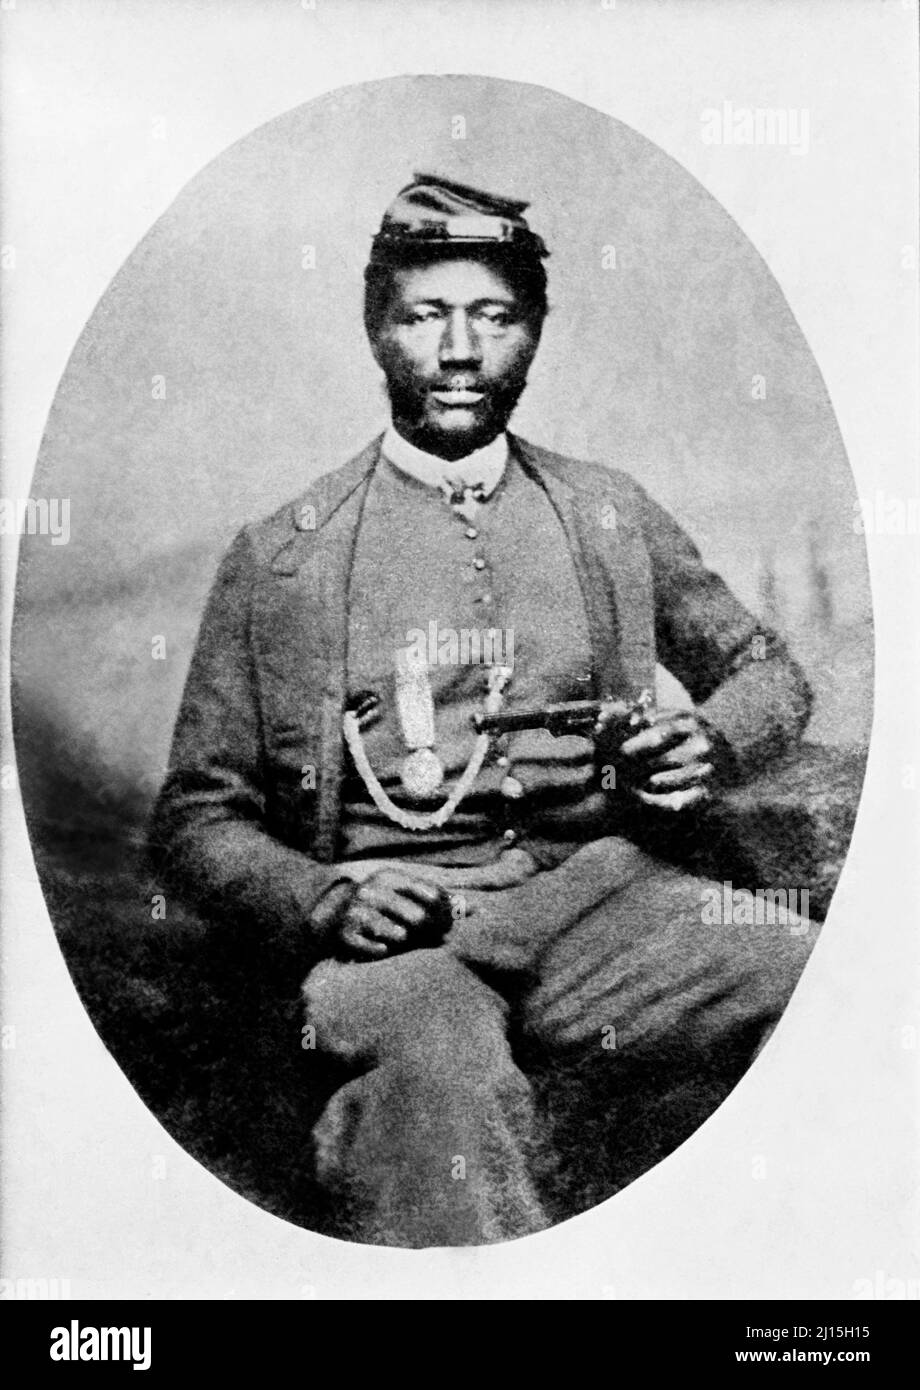 James H. Harris (1828-1898), African American Union Army soldier during the American Civil War,  recipient of Medal of Honor for his actions at the 1864 Battle of Chaffin's Farm, W.E.B. Du Bois Collection Stock Photo